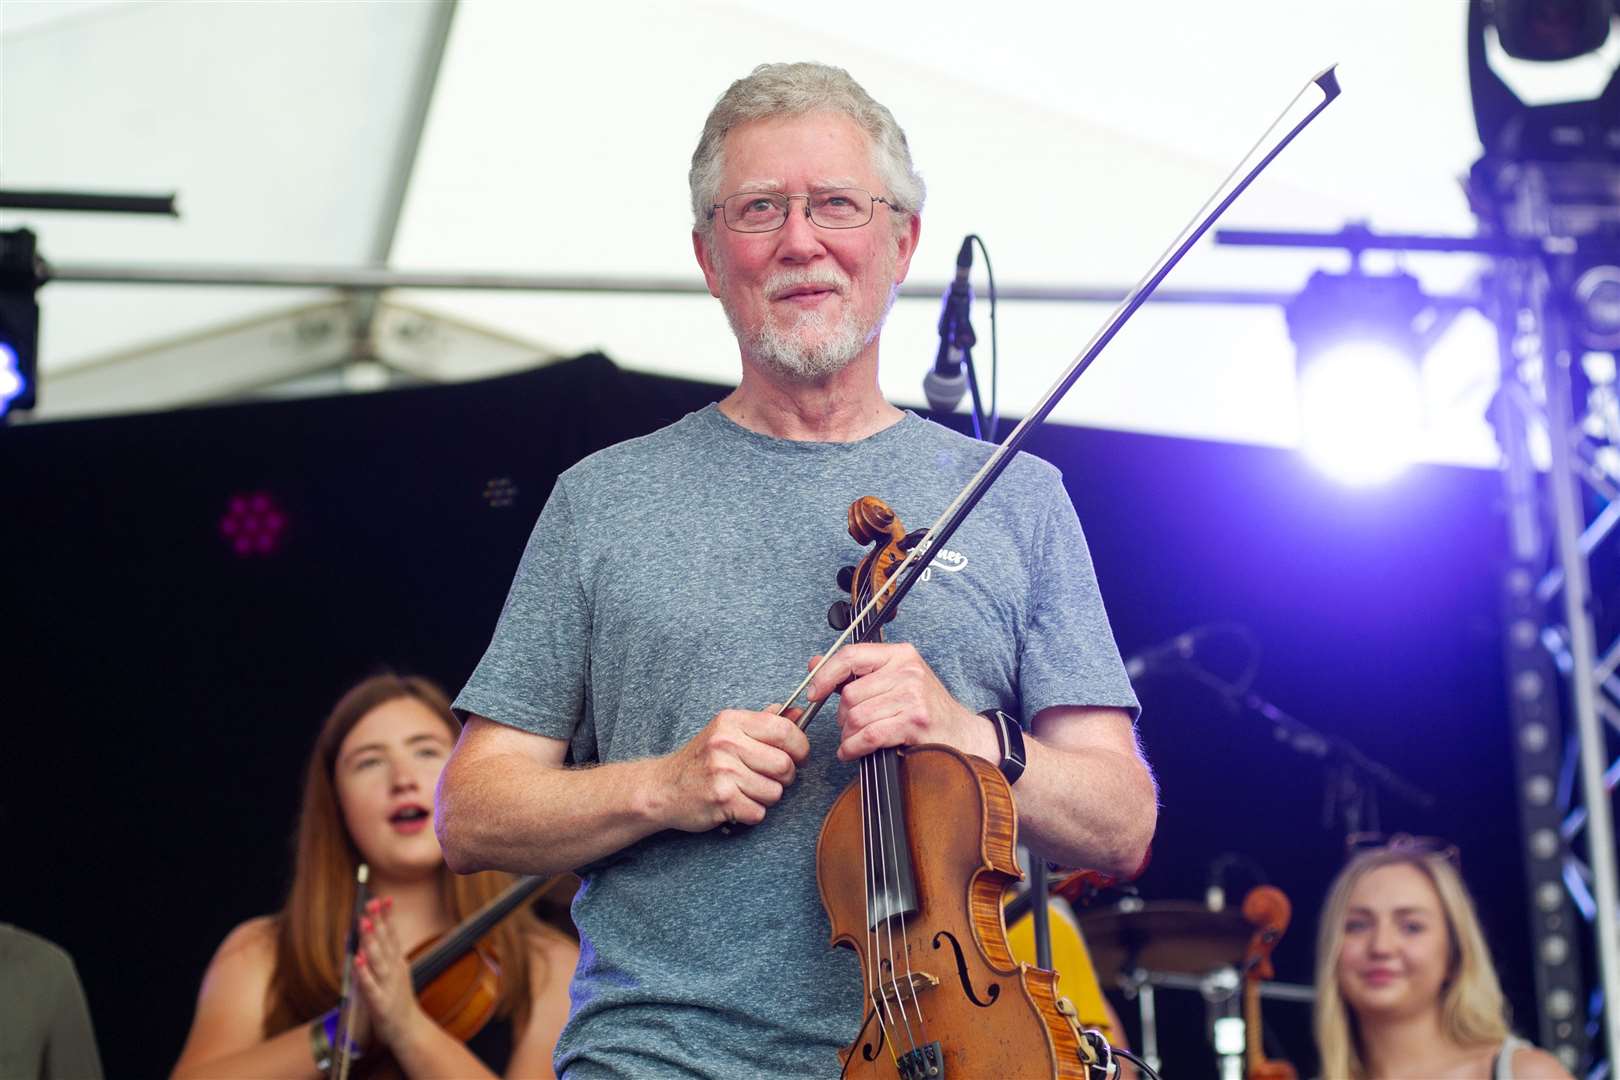 James Alexander at the end of the Fochabers Fiddlers Sunday session in 2019. Photo: Daniel Forsyth